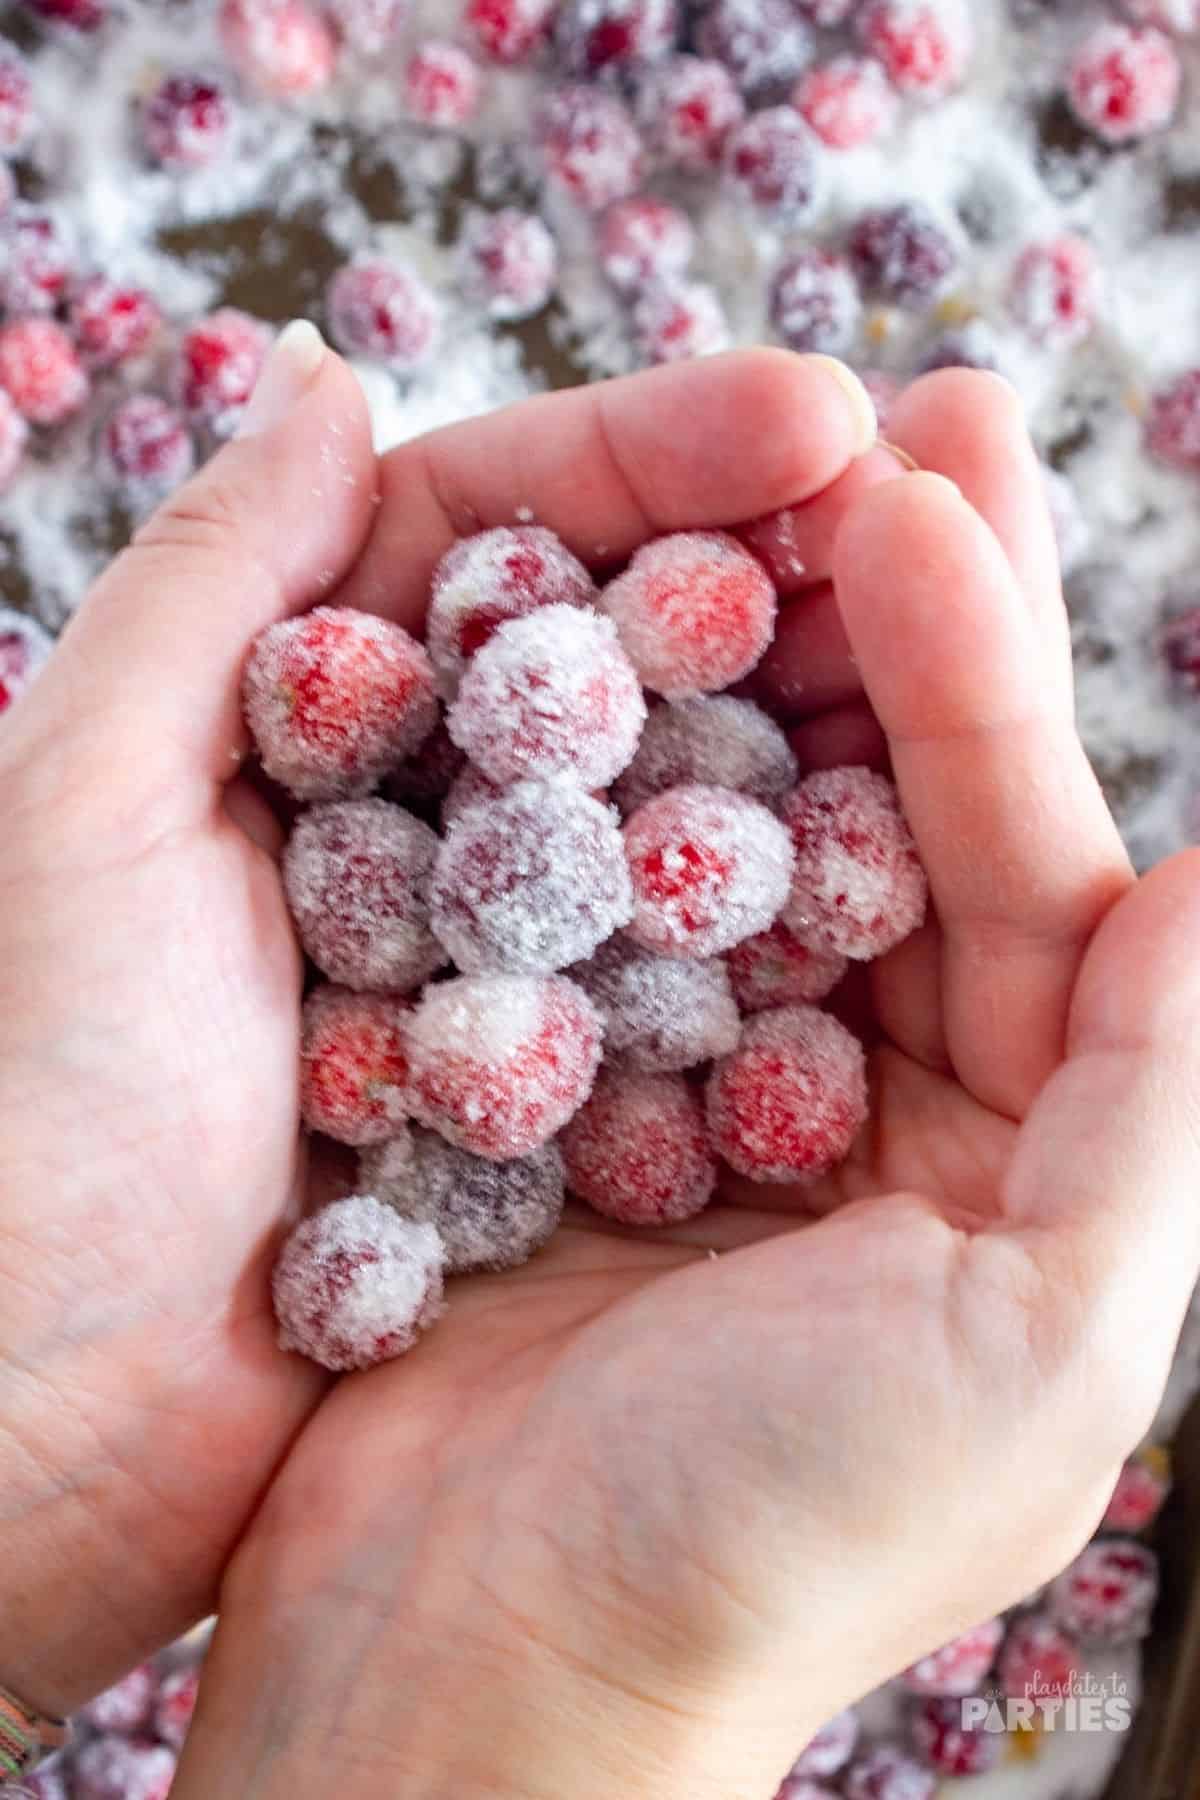 A woman's hands holding a pile of candied cranberries.